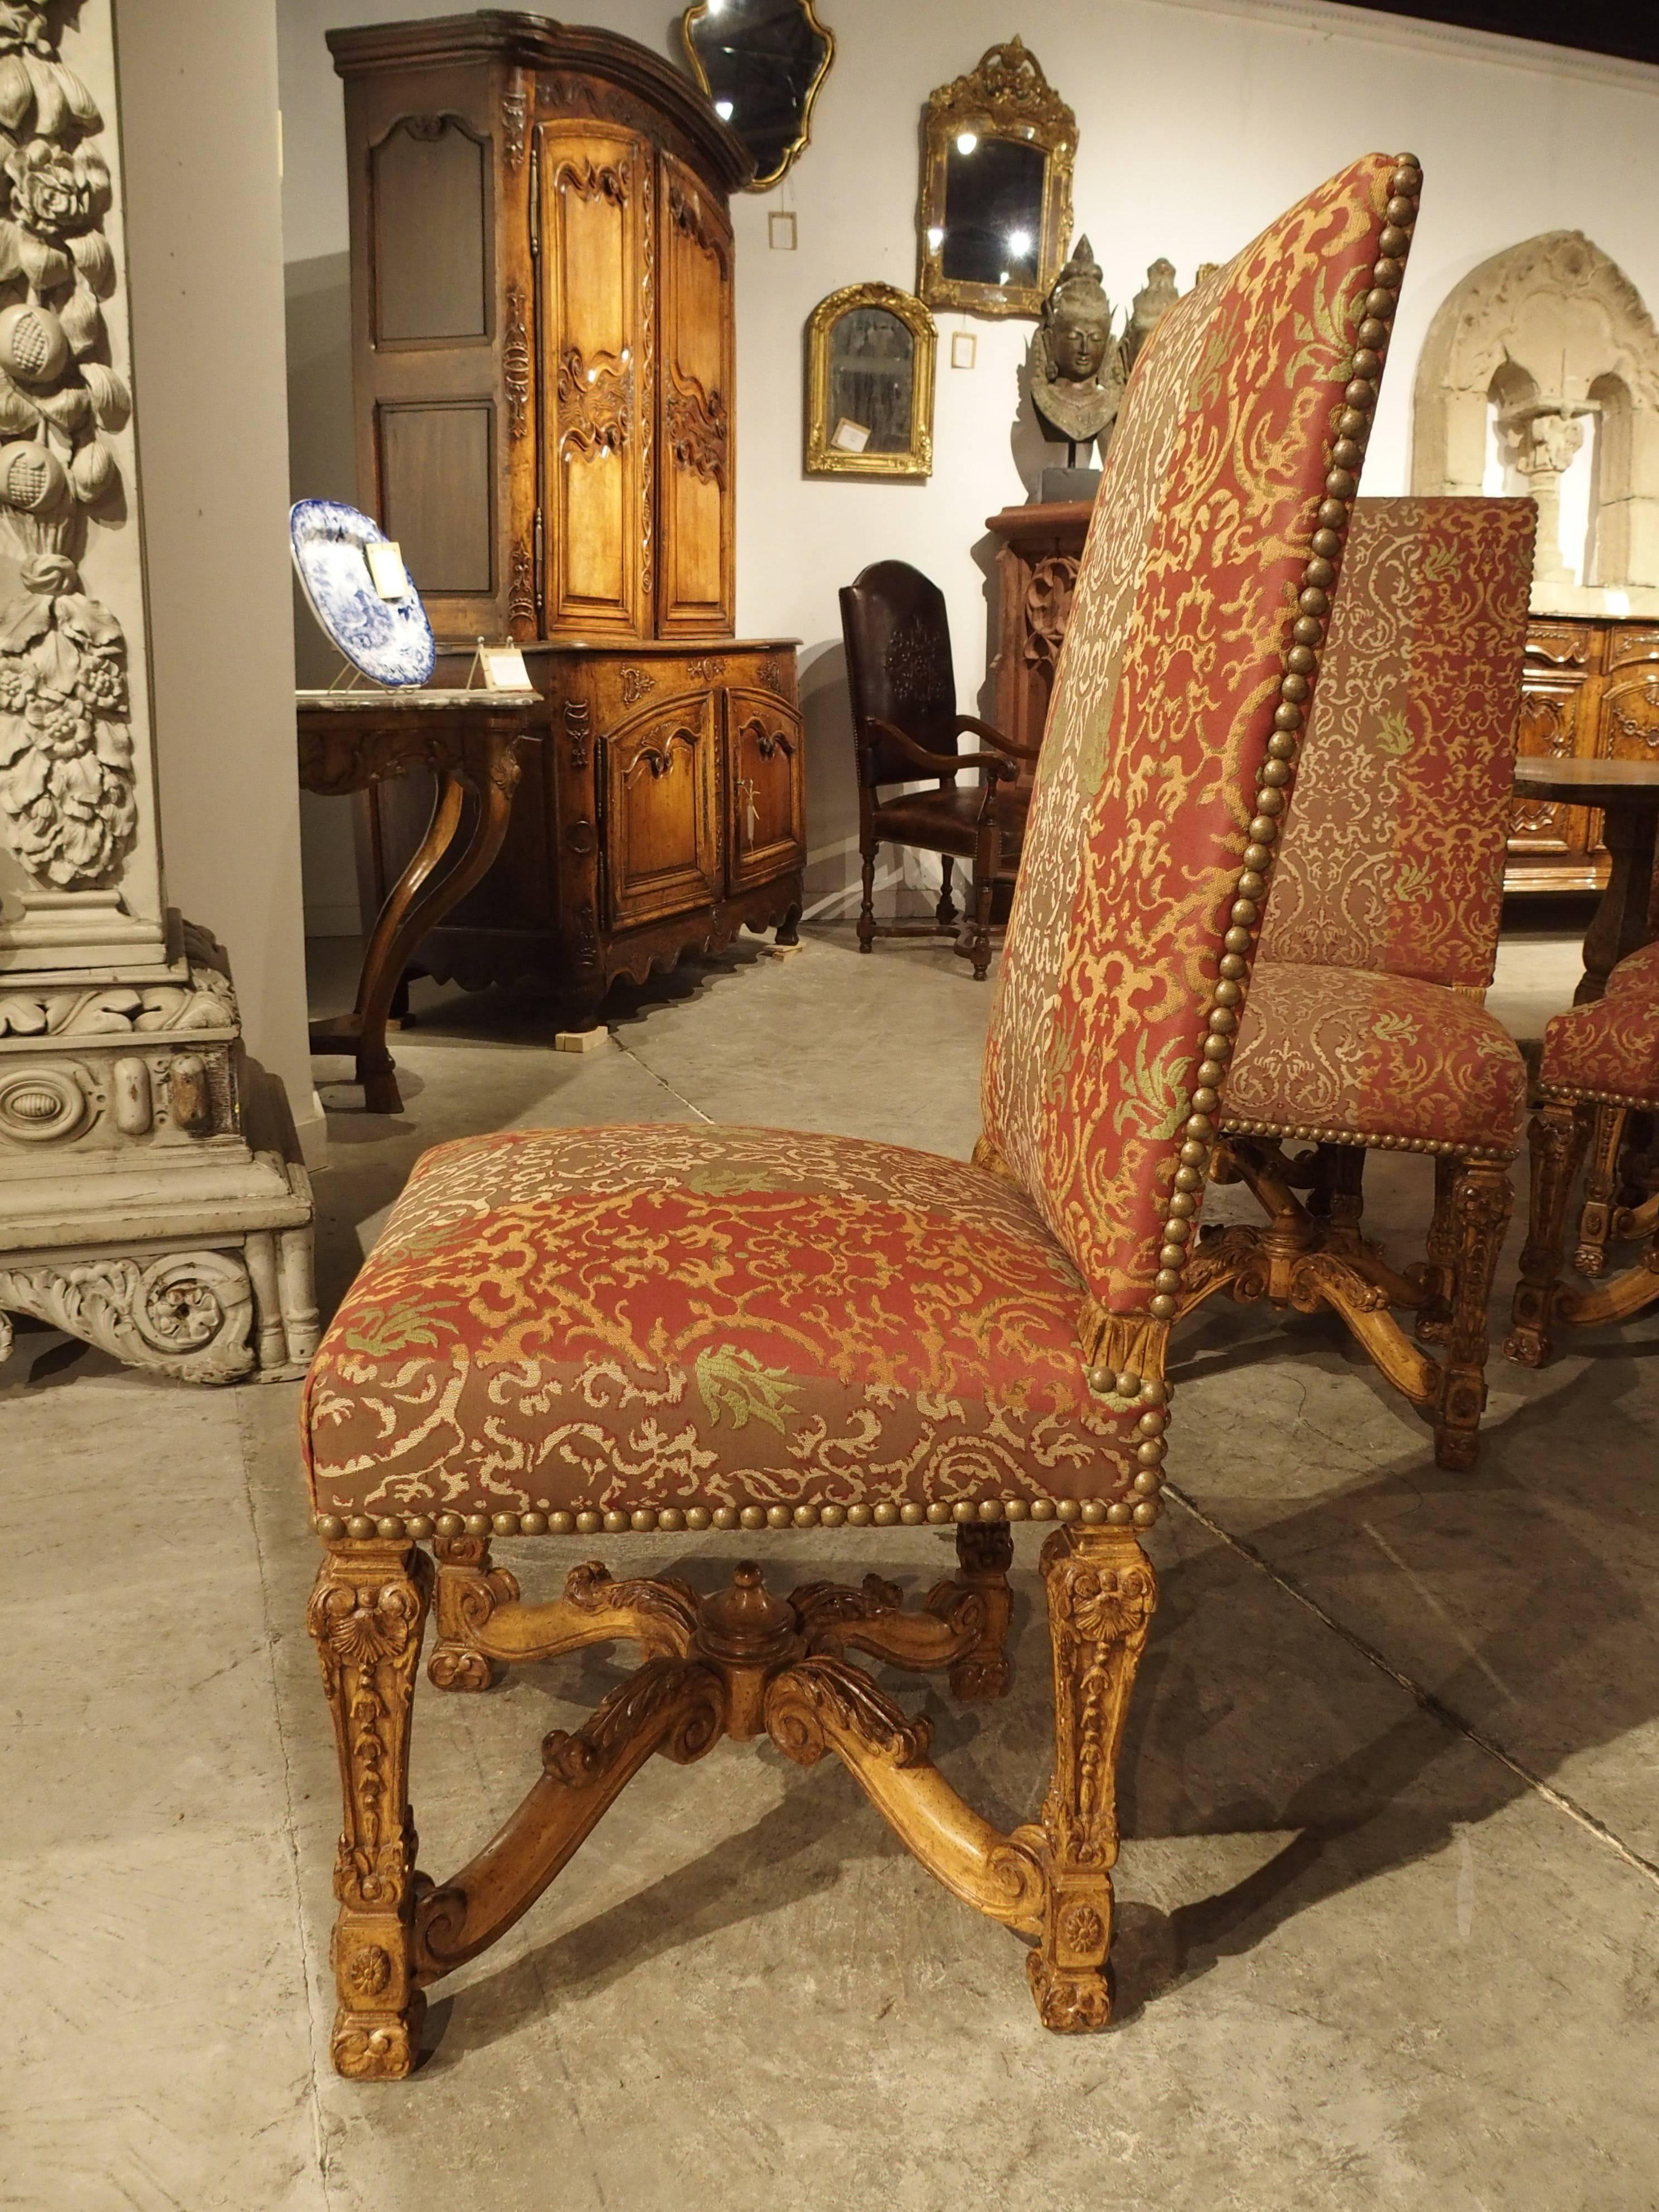 This majestic set of 12 Louis XIV style chairs date to the 1900s. There are ten side chairs and two fauteuils or armchairs. They have been upholstered with brass nailheads in an elegant damask fabric complementing the chairs’ style. All of the wood